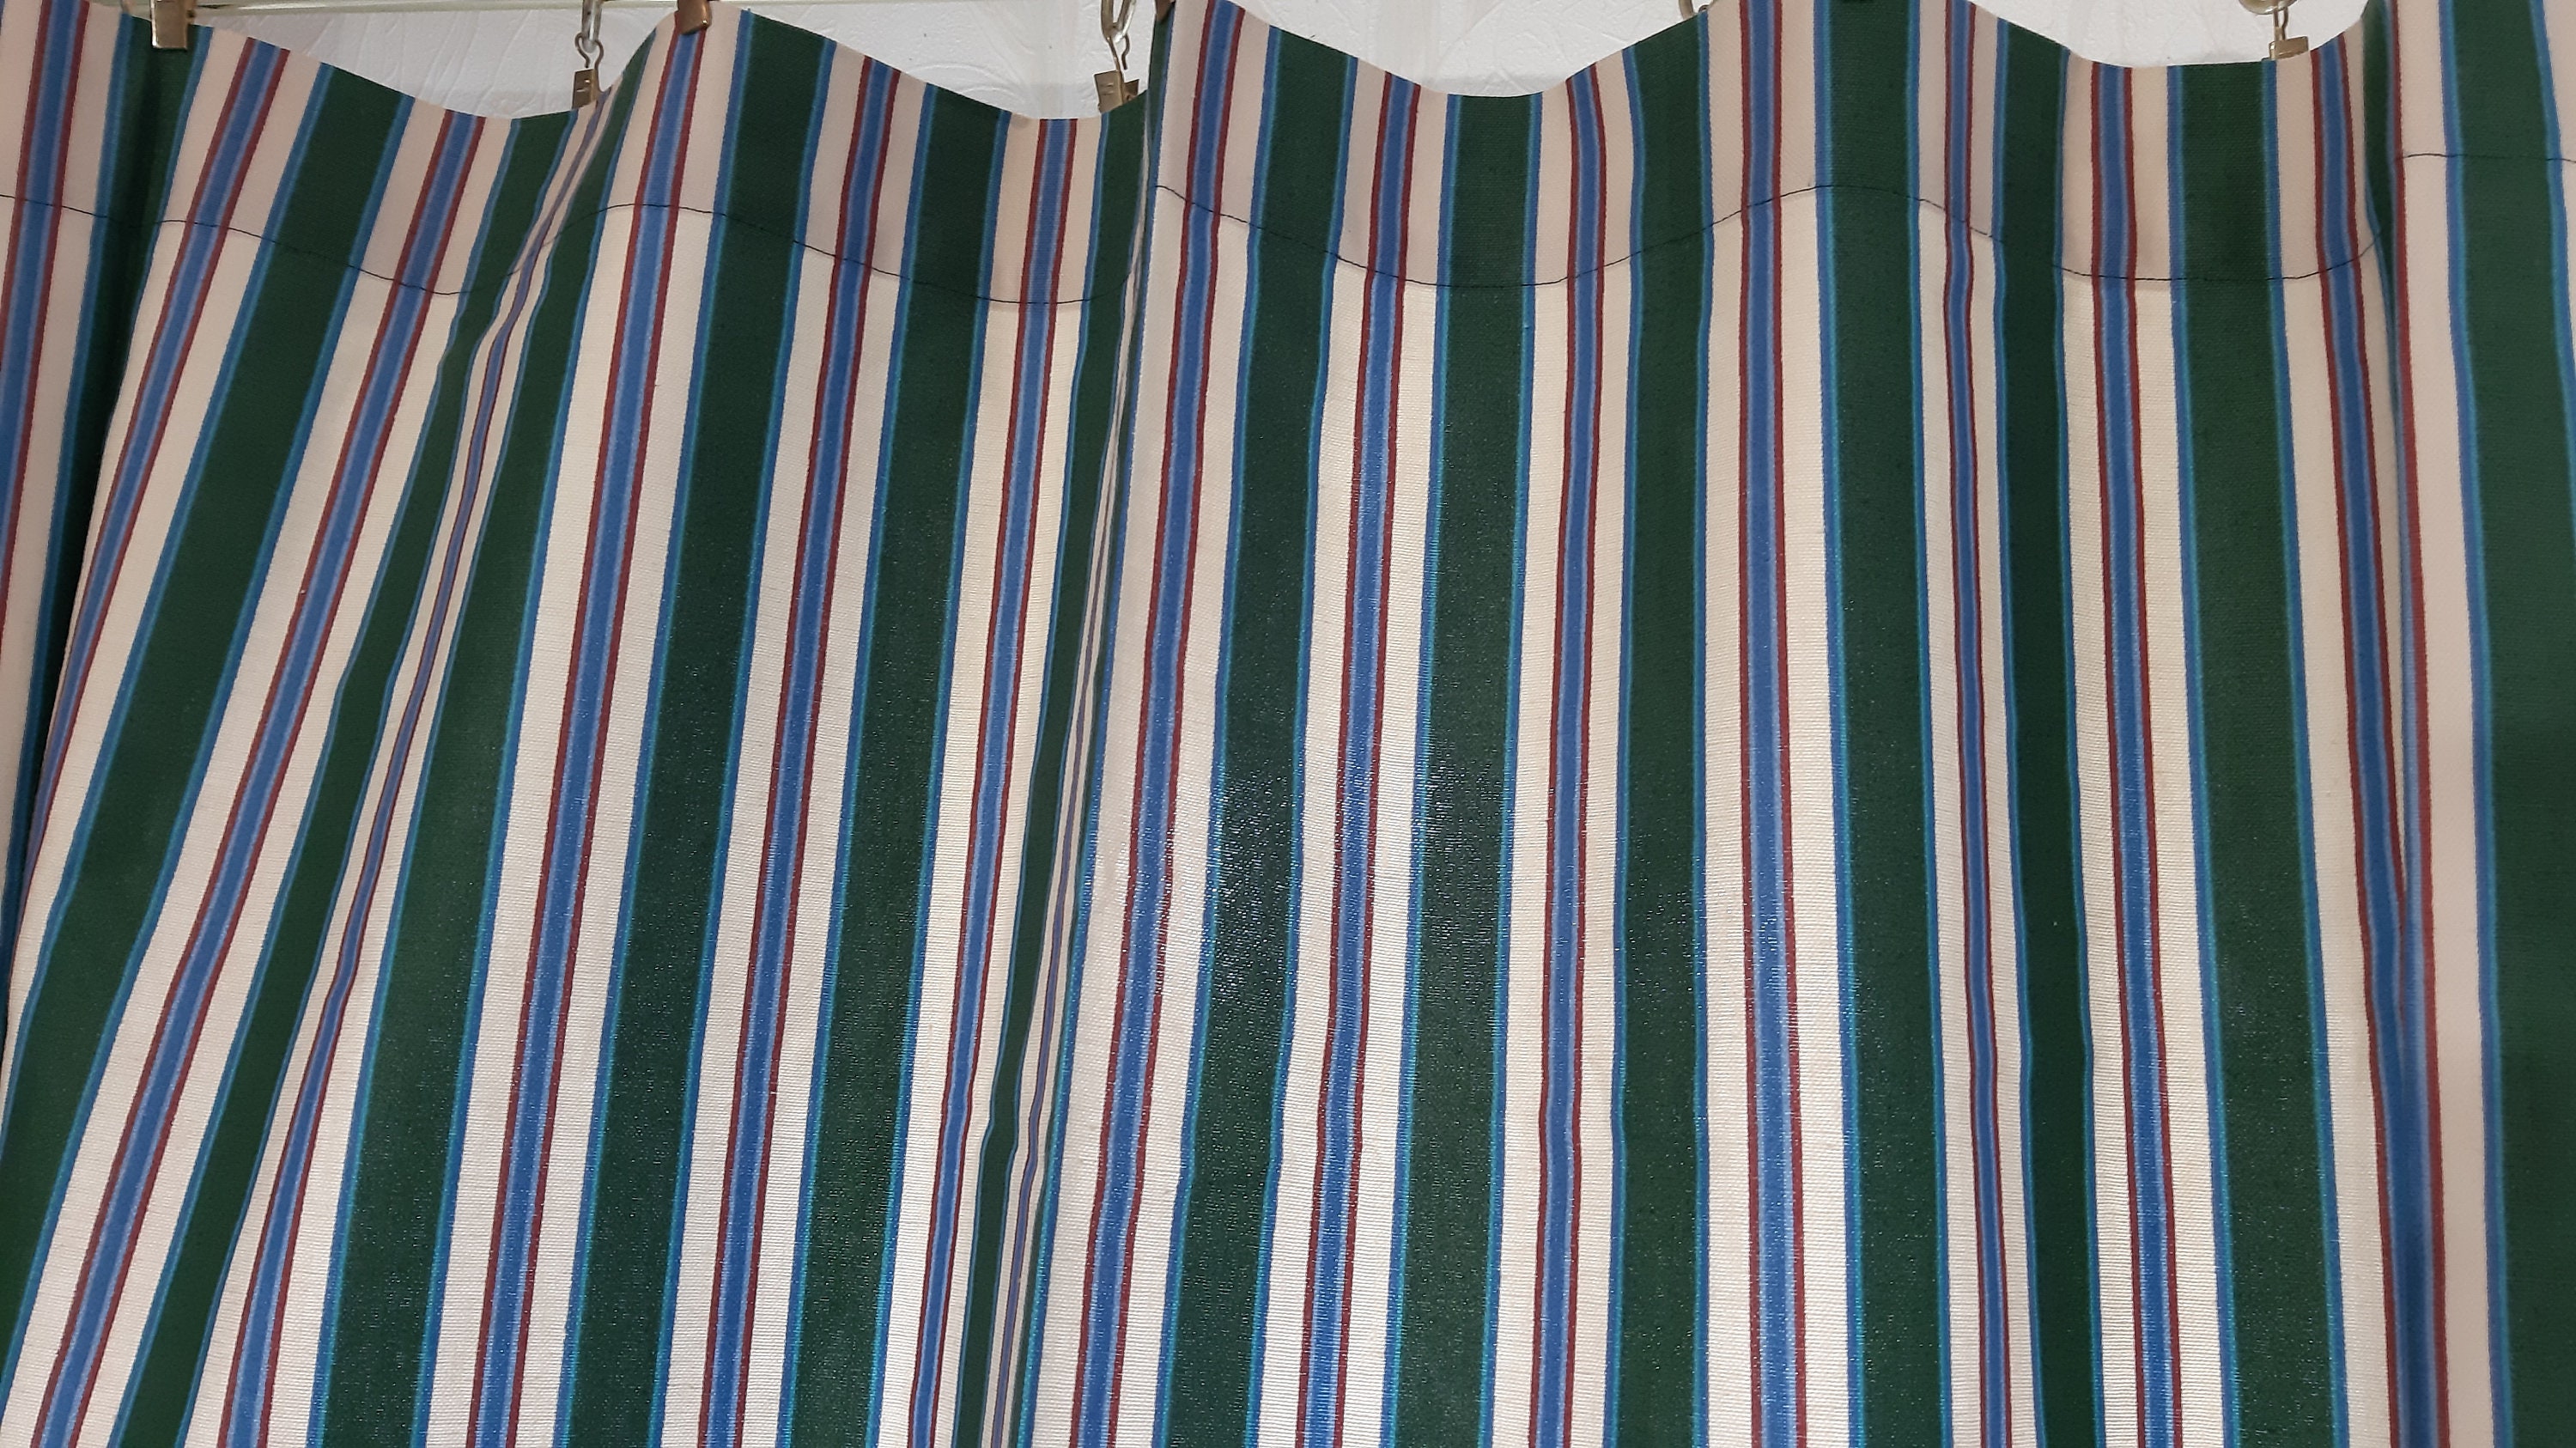 Cotton Short wide curtains Green white blue red striped | Etsy